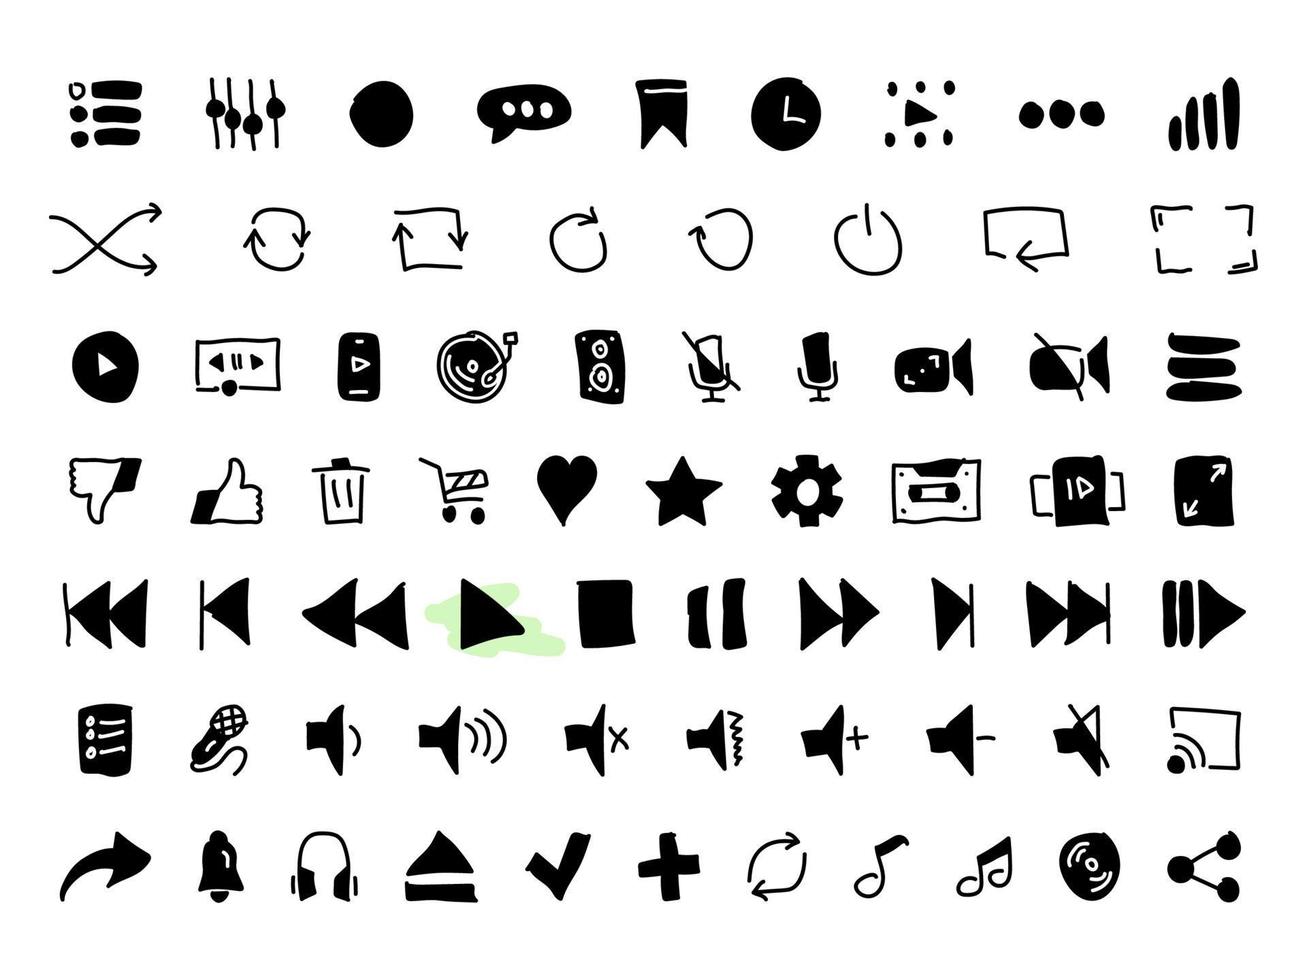 Set of black vector doodle icons, isolated against white background. Flat illustration on a theme audio and video player buttons. Fill, glyph